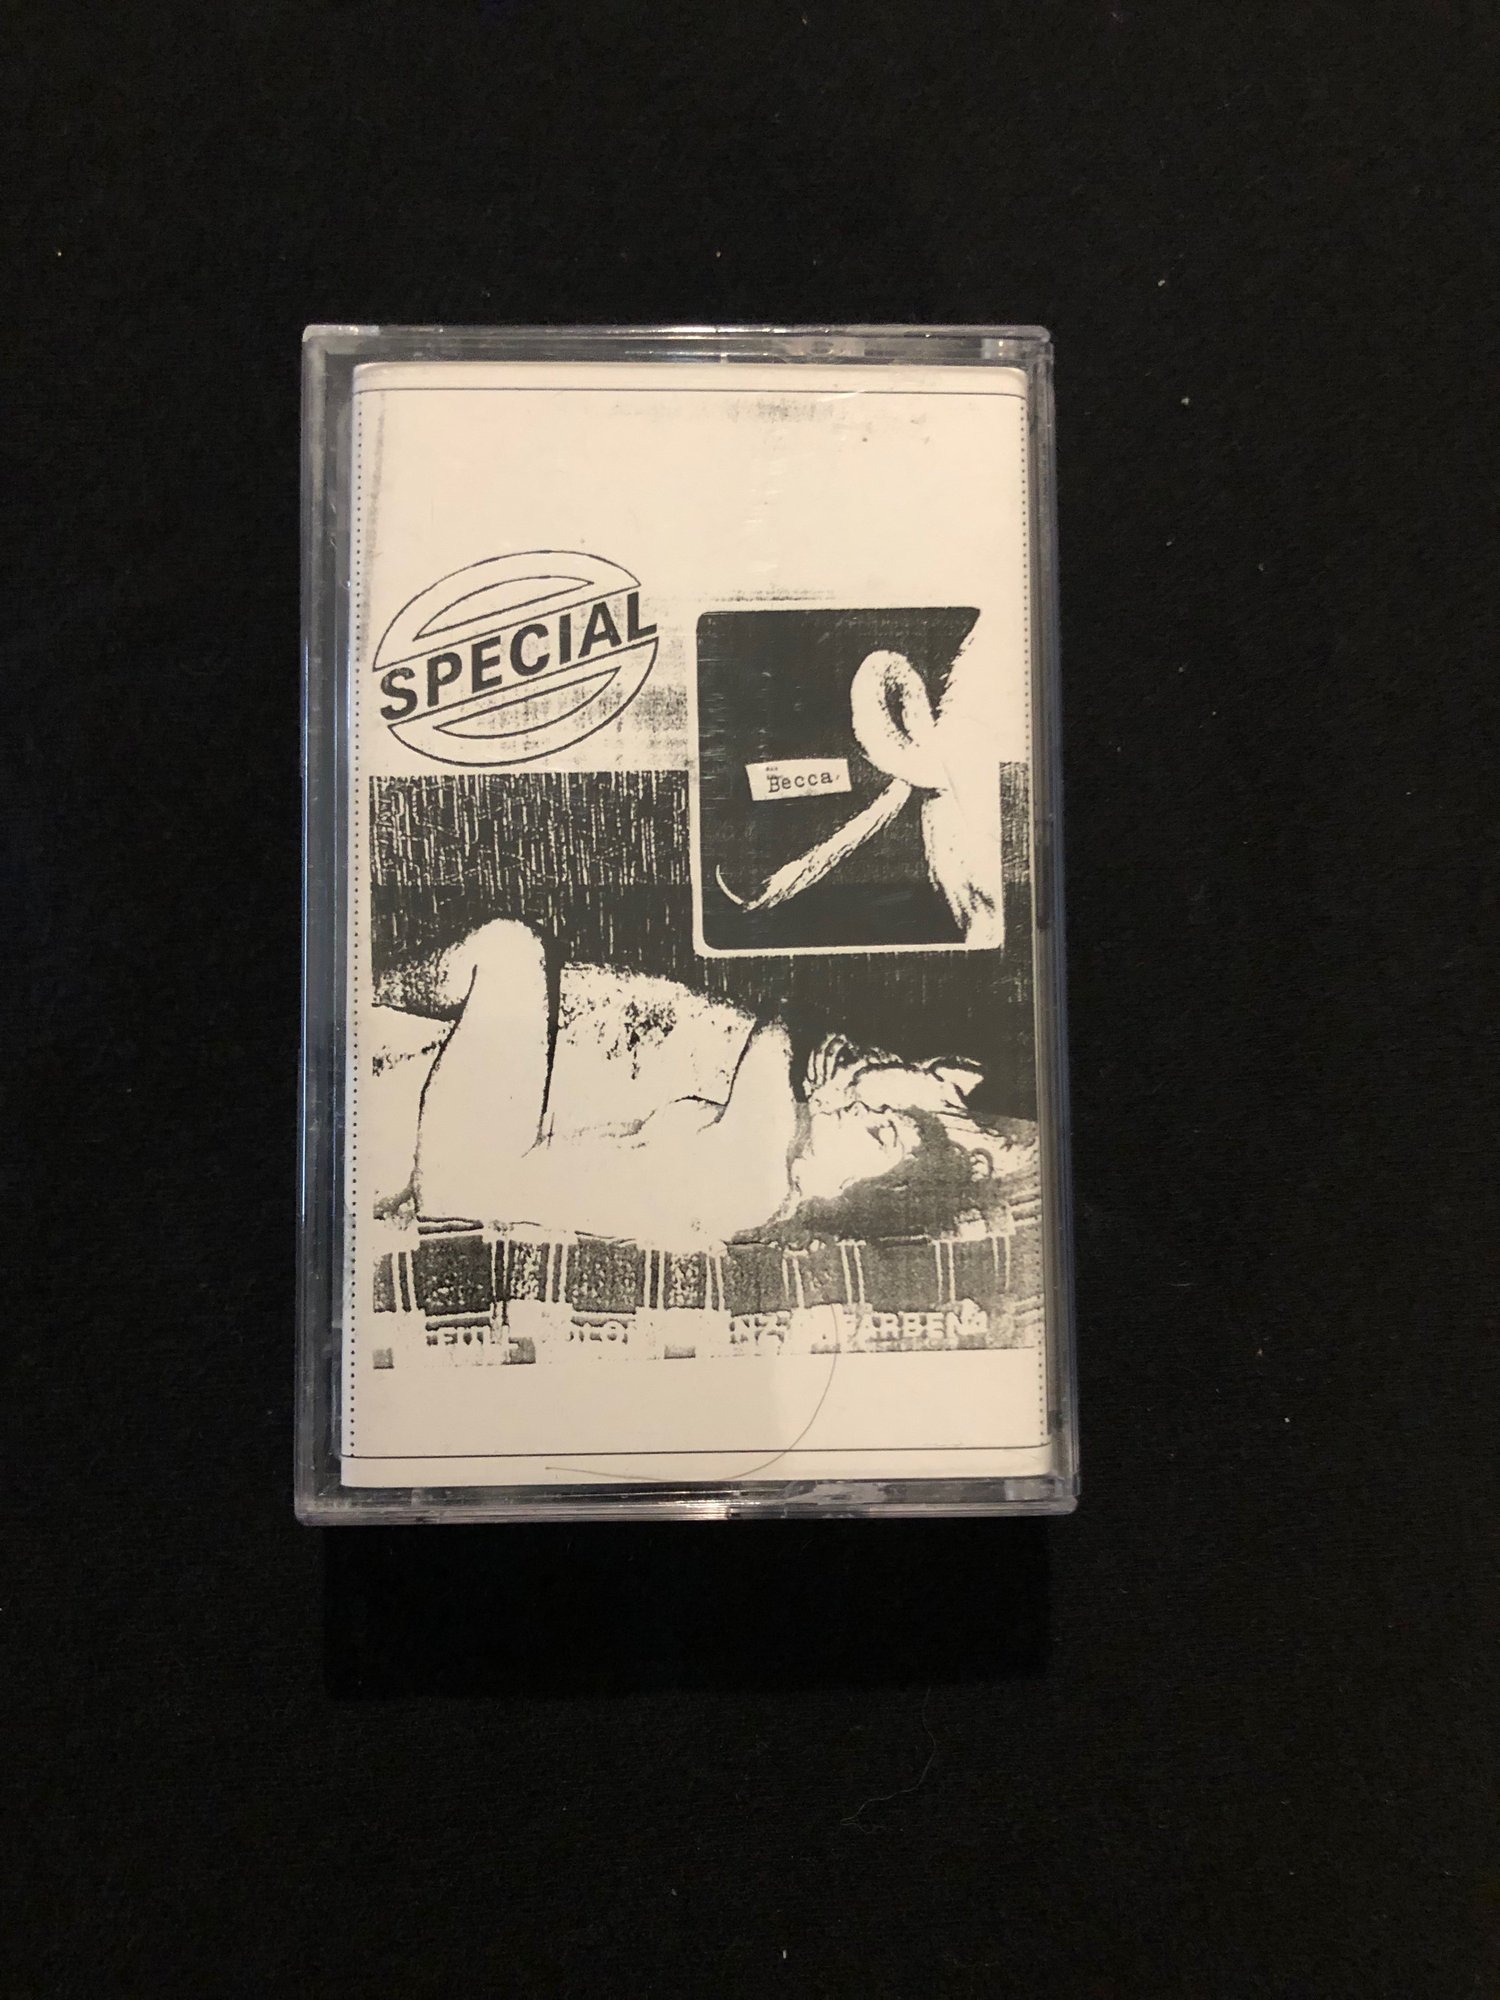 Special Becca - S/T CS (Angst)